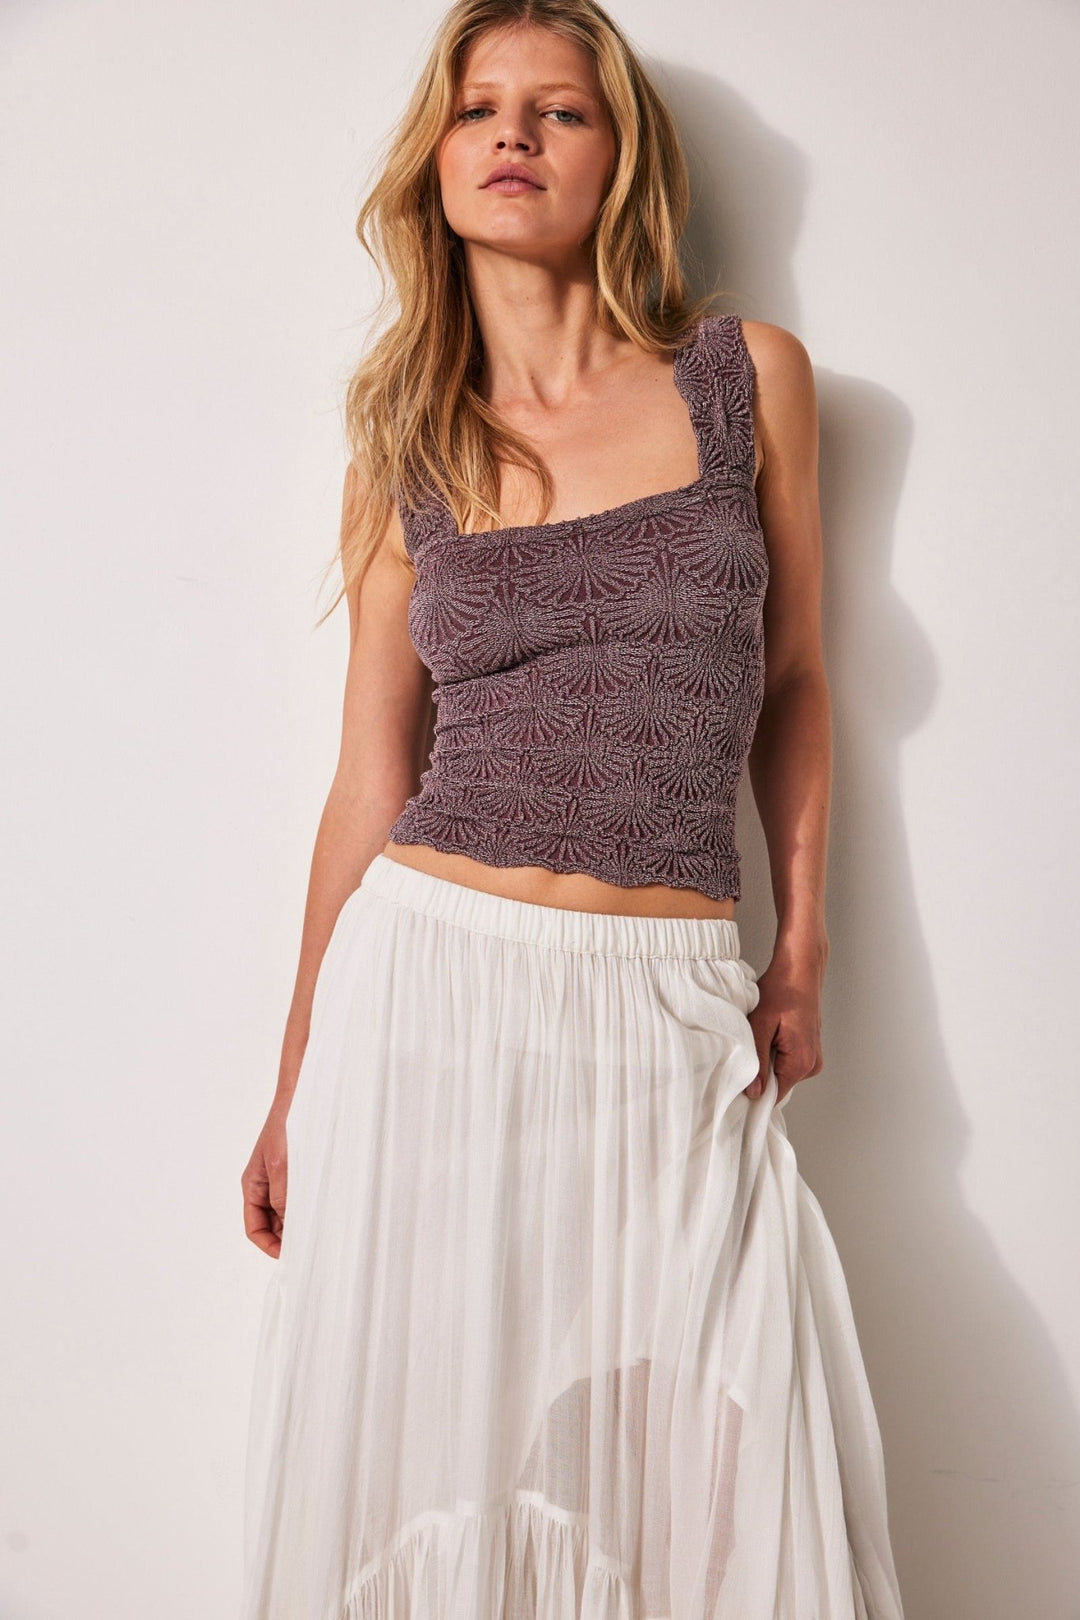 Free People TankLove Letter Cami | Free People